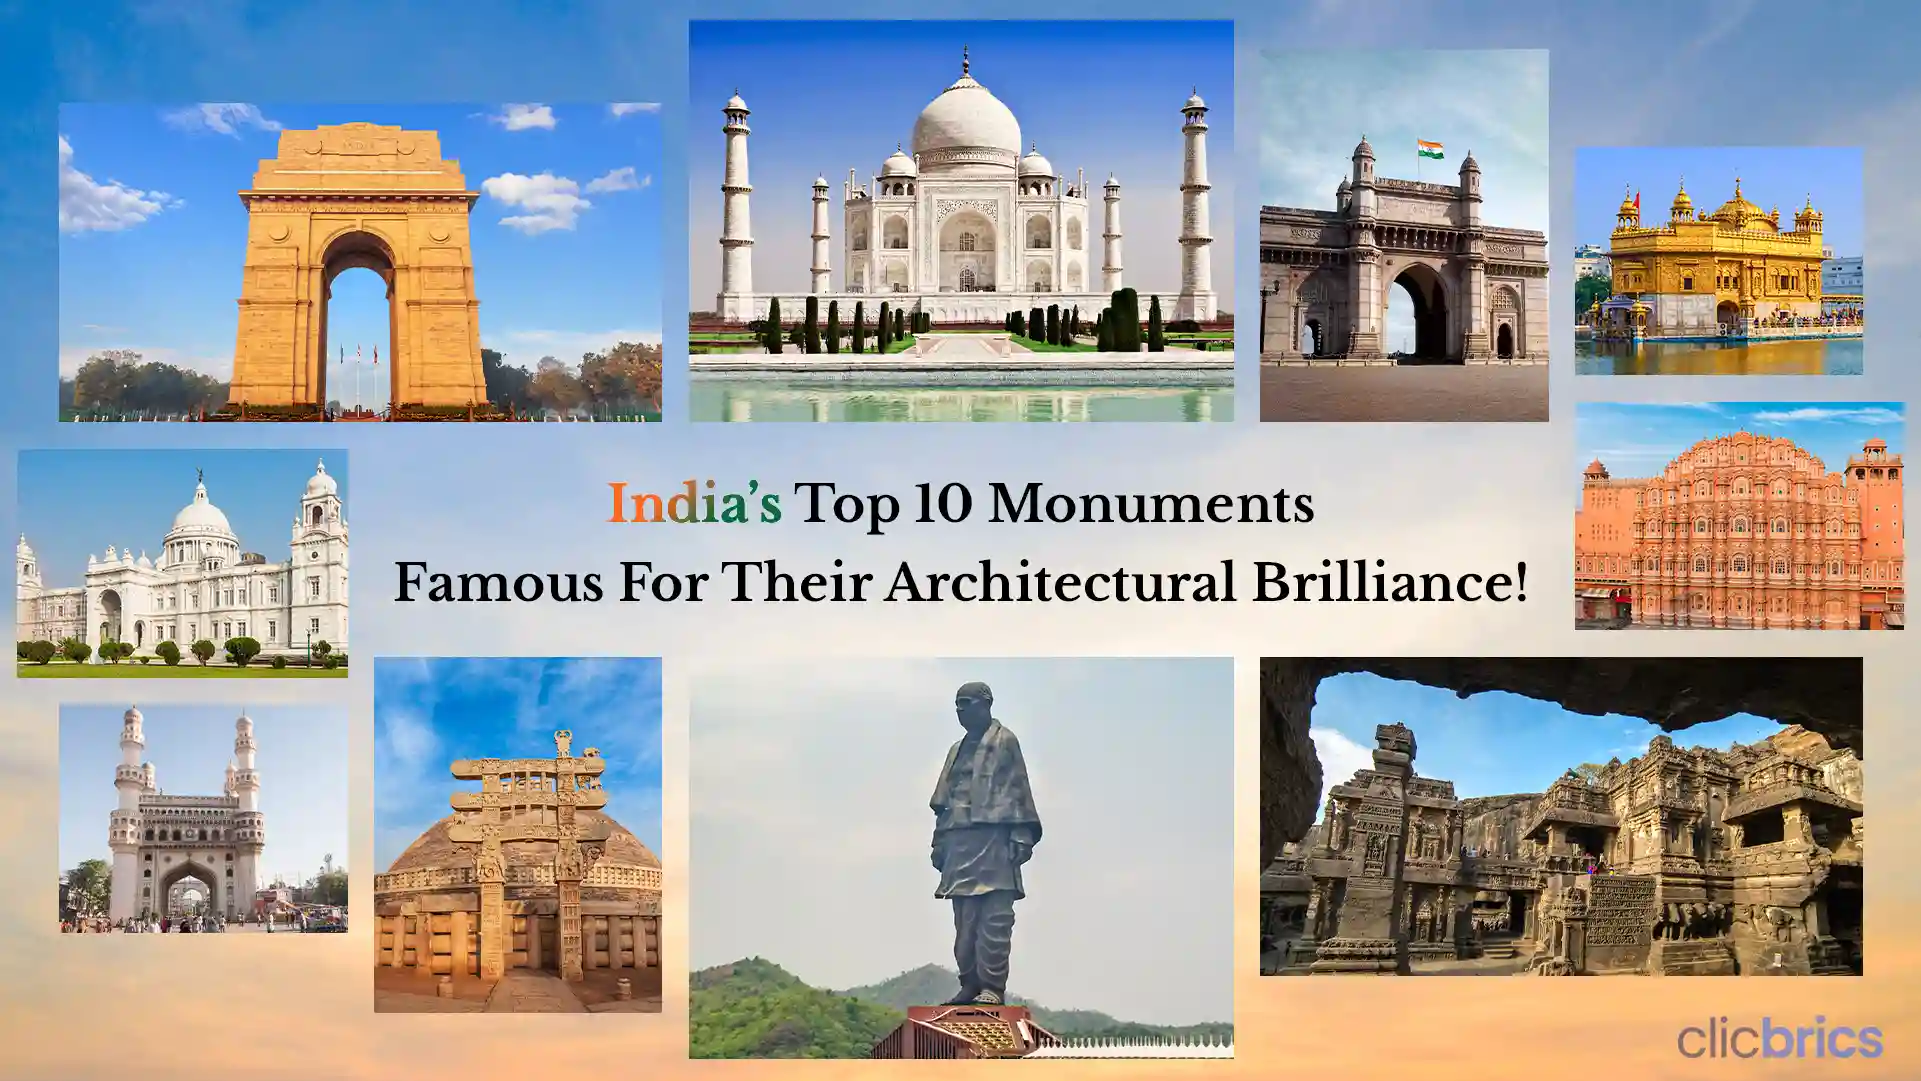 4 Spectacular Historical Monuments in India — Besides the Taj Mahal